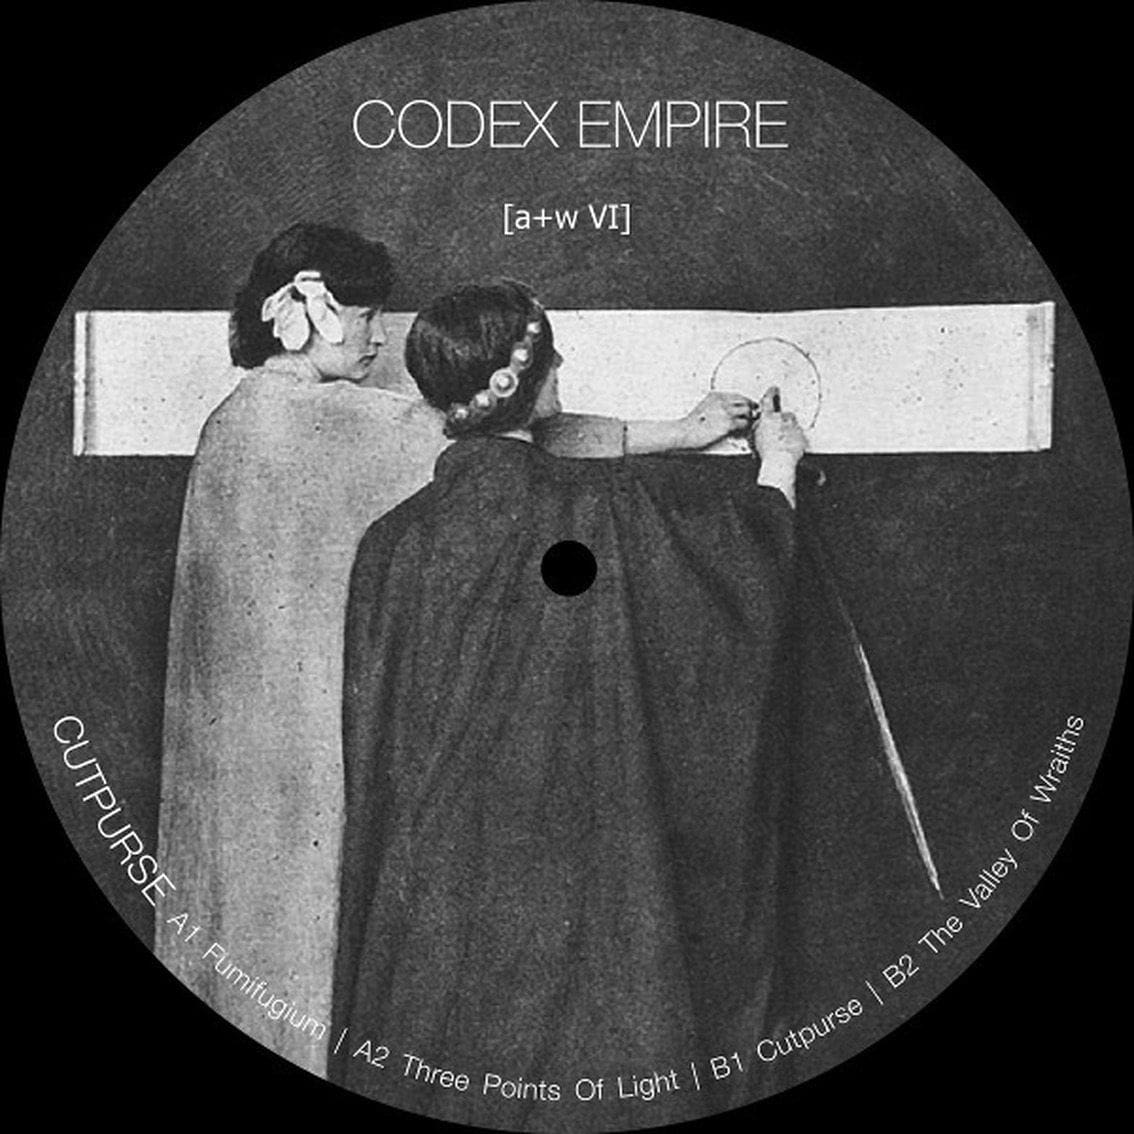 The techno EBM act Codex Empire returns with a second vinyl EP in a ltd edition - available now